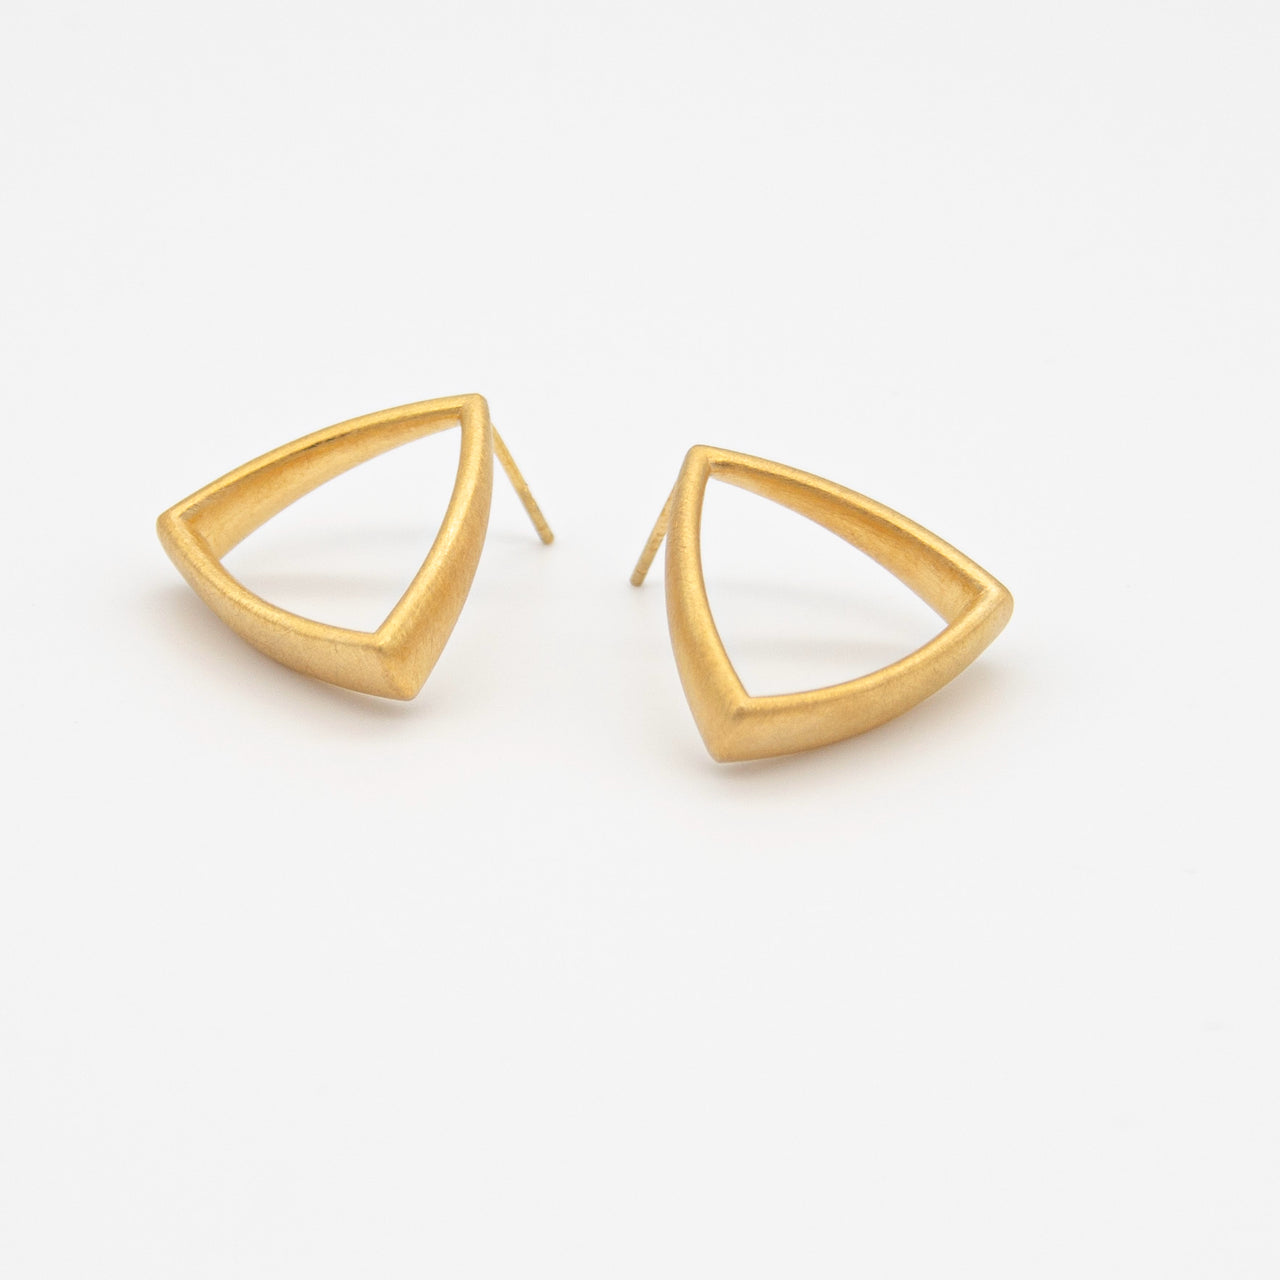 Curved Curves Triangle Earrings Gold